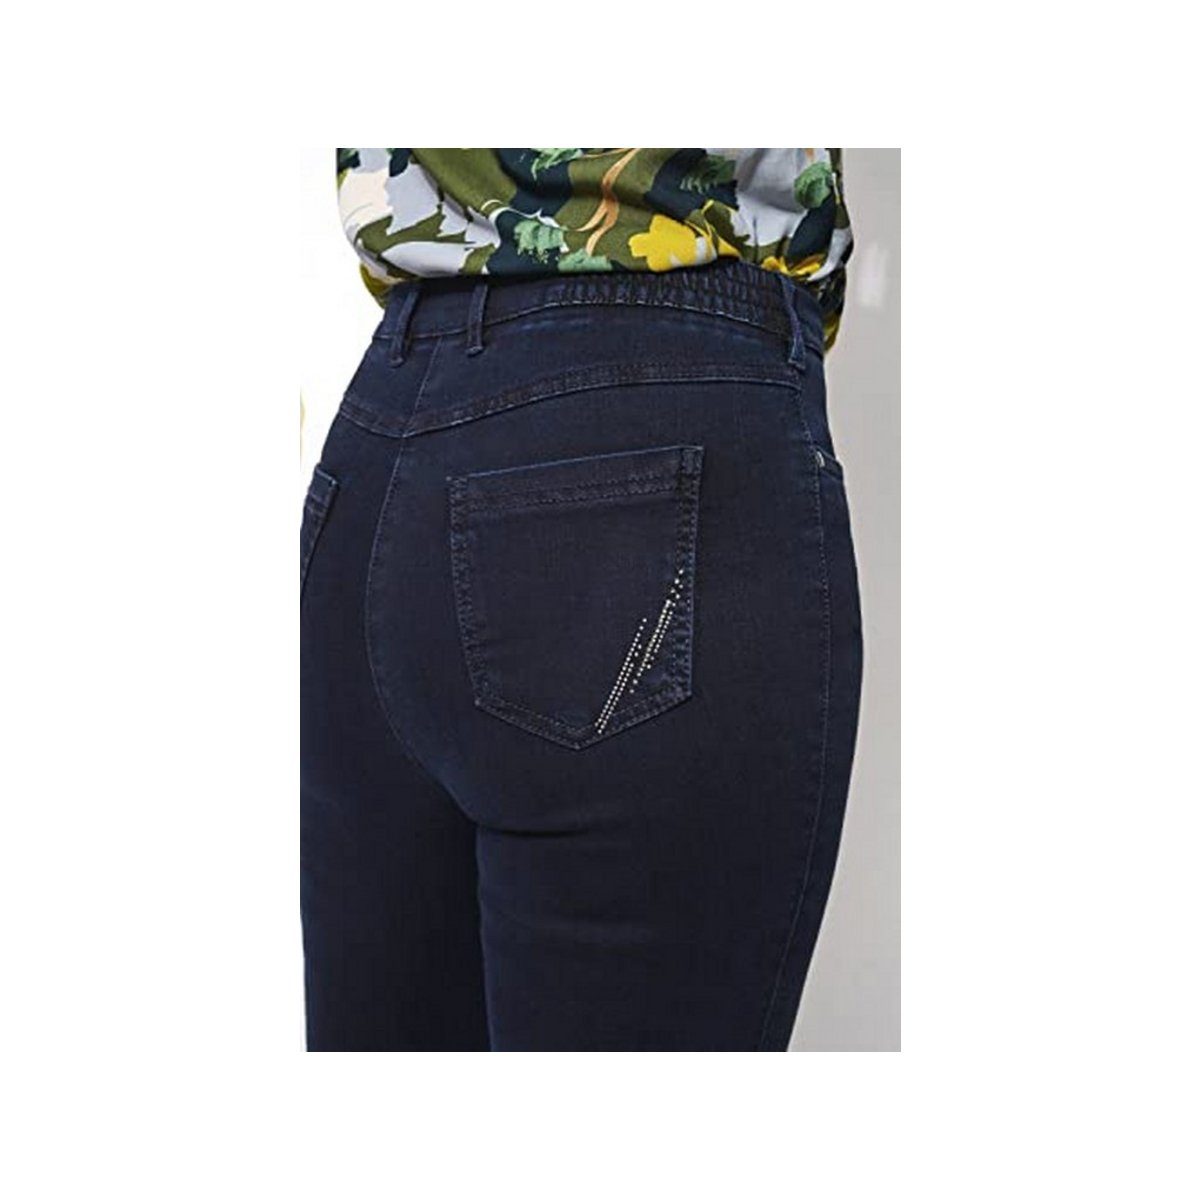 Relaxed by TONI (1-tlg) kombi 5-Pocket-Jeans